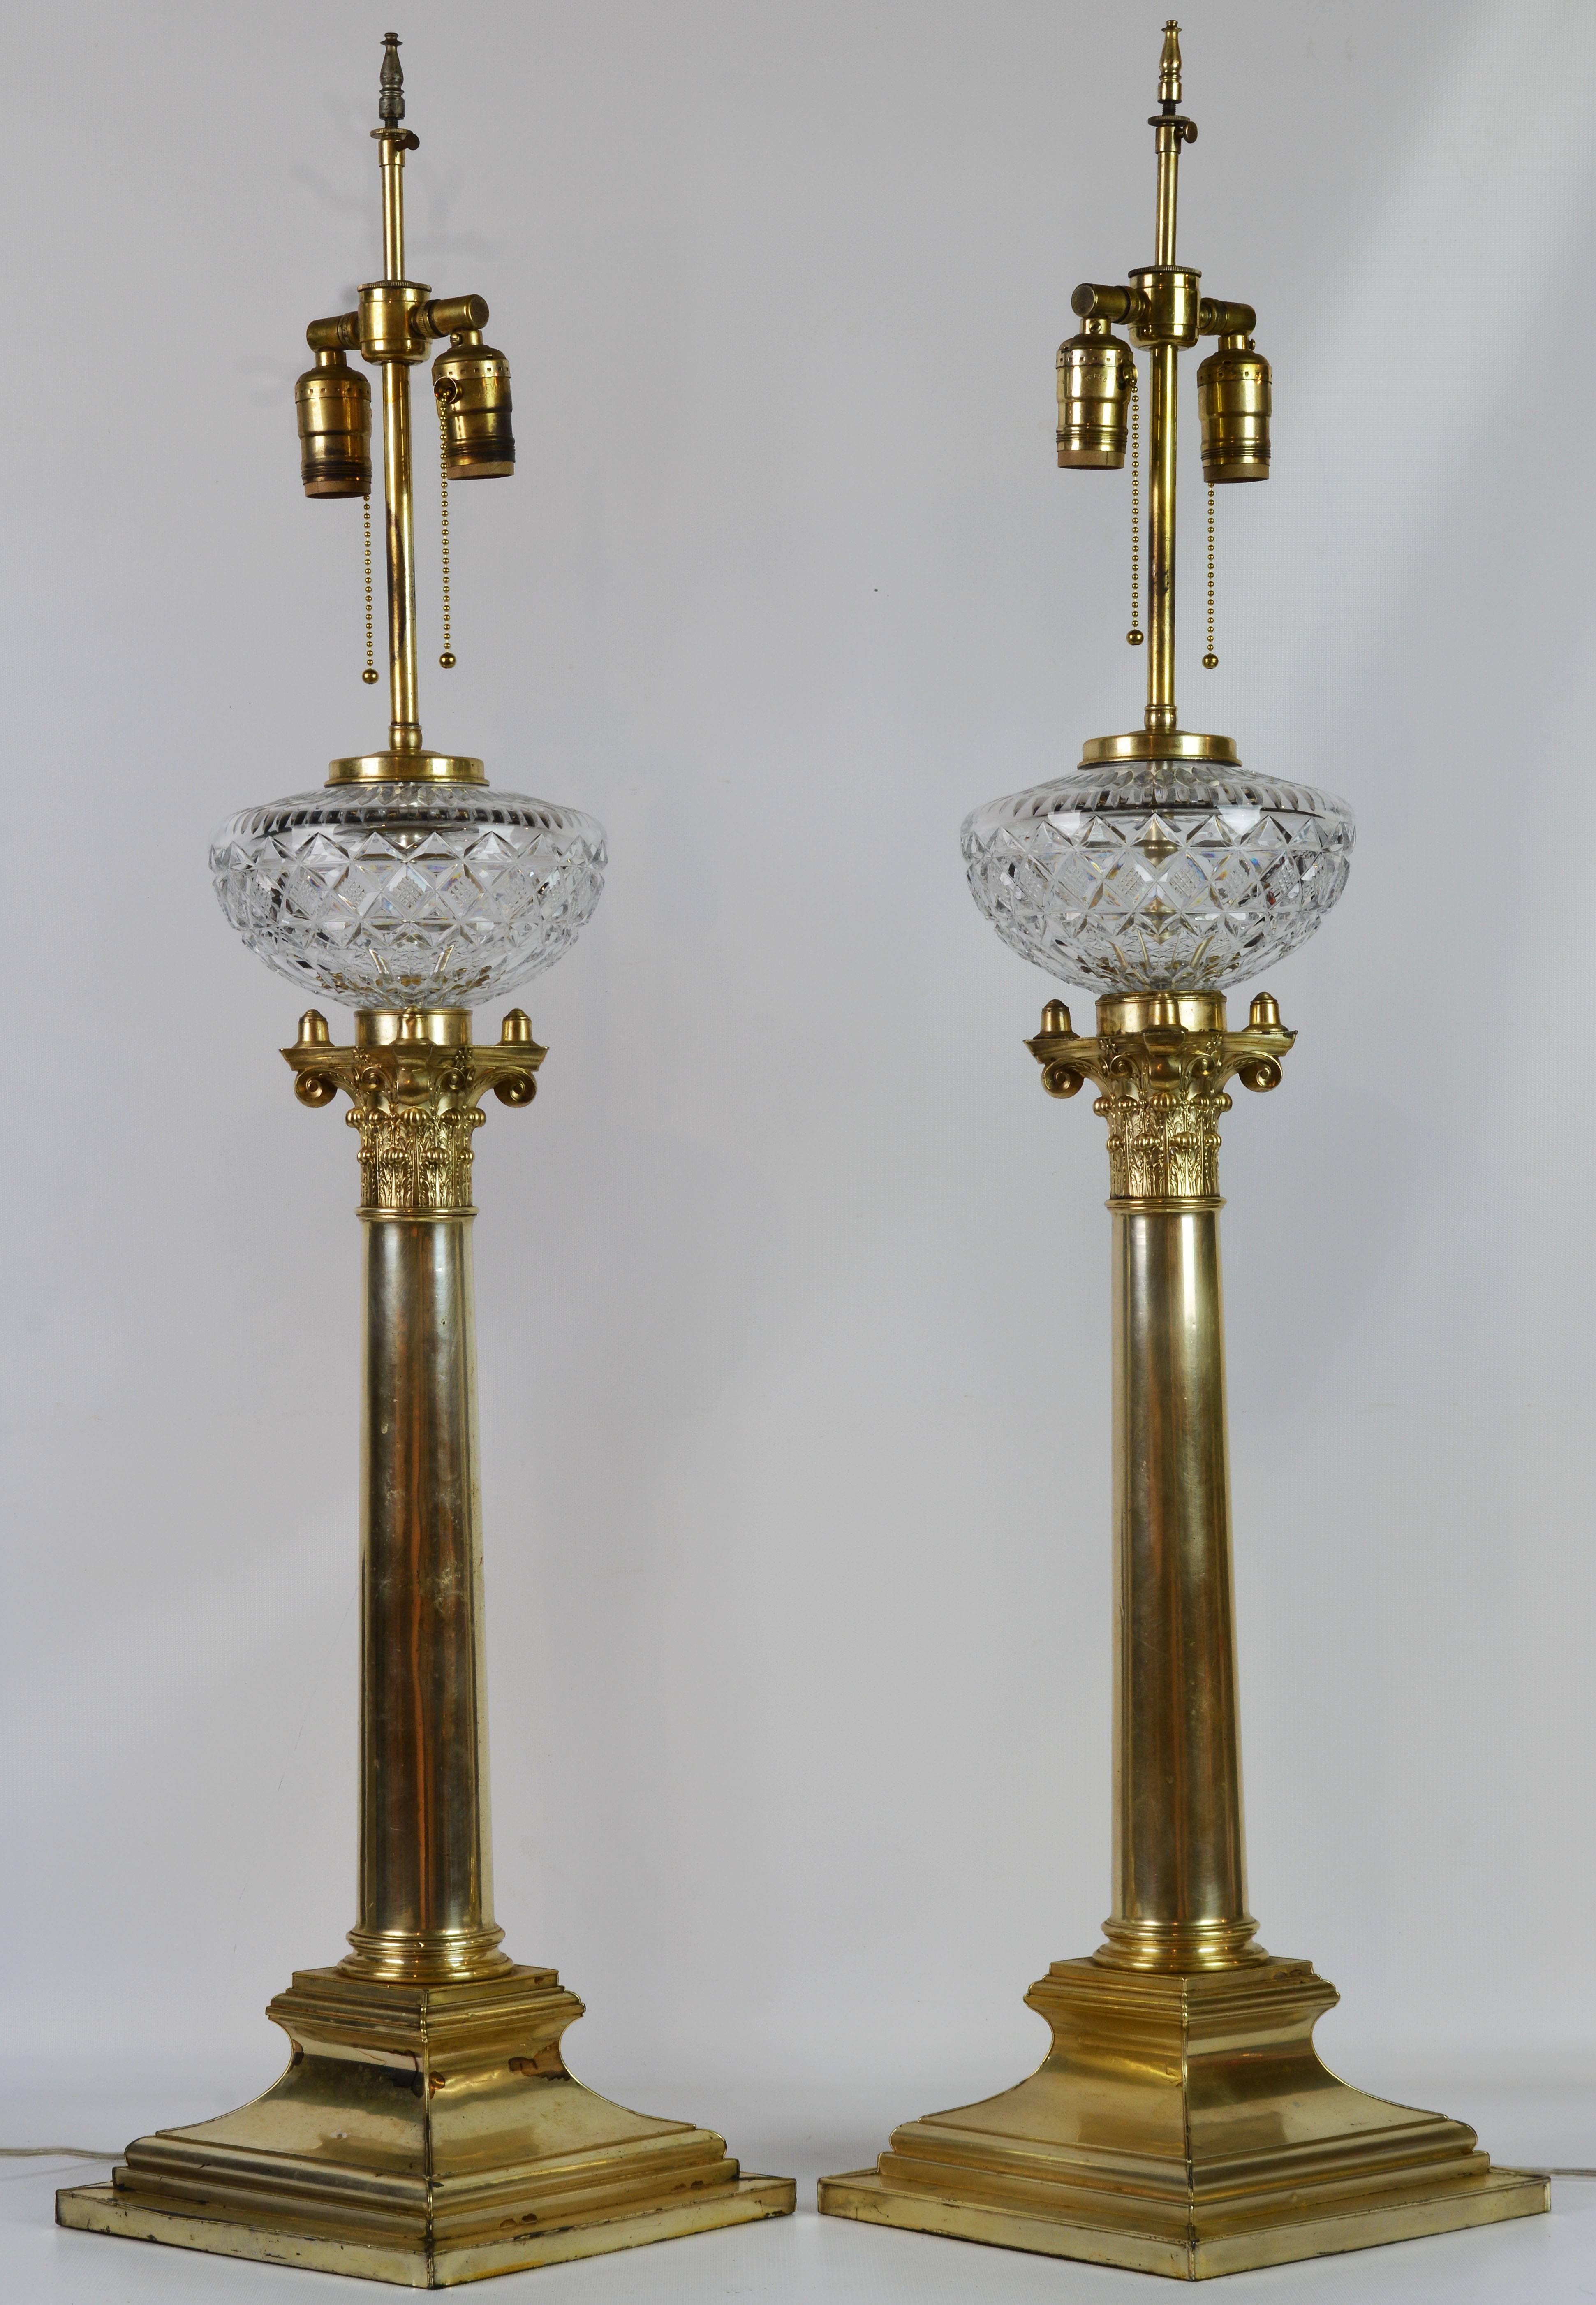 Standing 41 inches tall these impressive lamps were formerly oil lamps which have later been electrified retaining their magnificent cut crystal bowls. They are made of silvered brass in the Sheffield tradition and feature elegant Corinthian columns